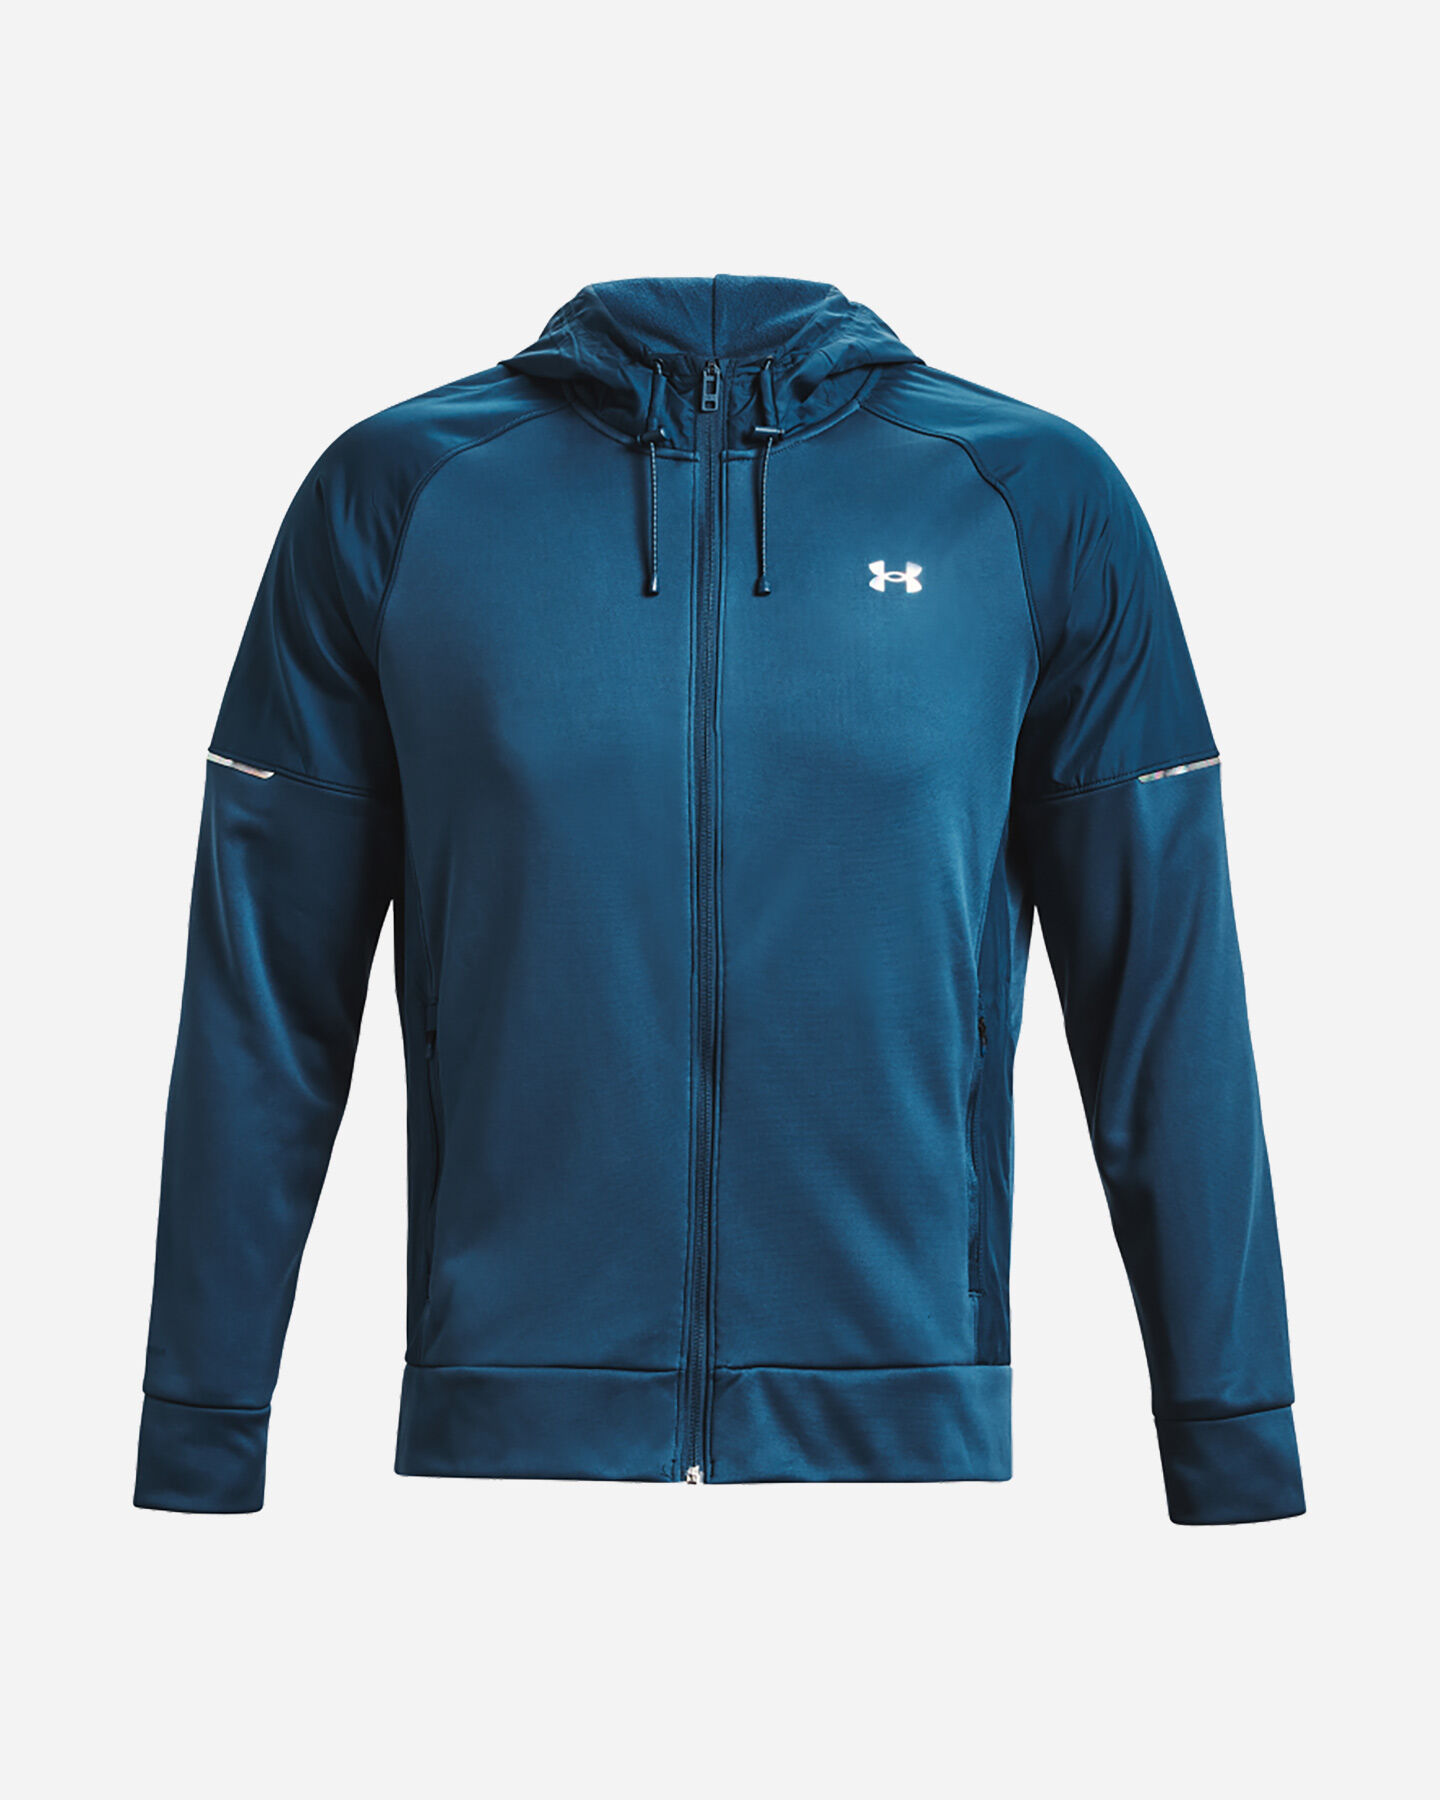  Felpa UNDER ARMOUR AF STORM M S5459616|0437|XS scatto 0